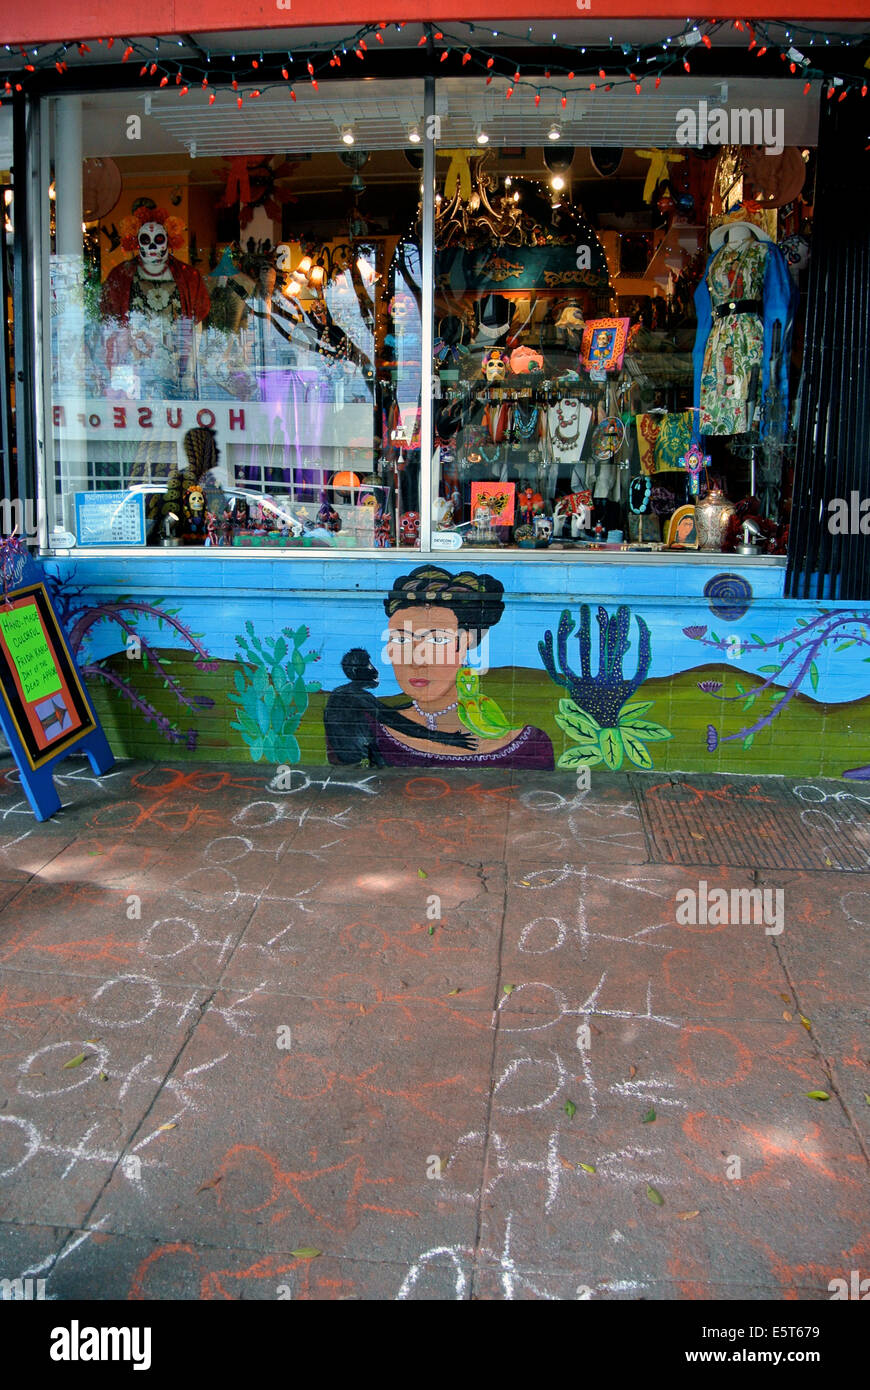 Political graffiti on sidewalk in front of shop in Mission District San Francisco Stock Photo